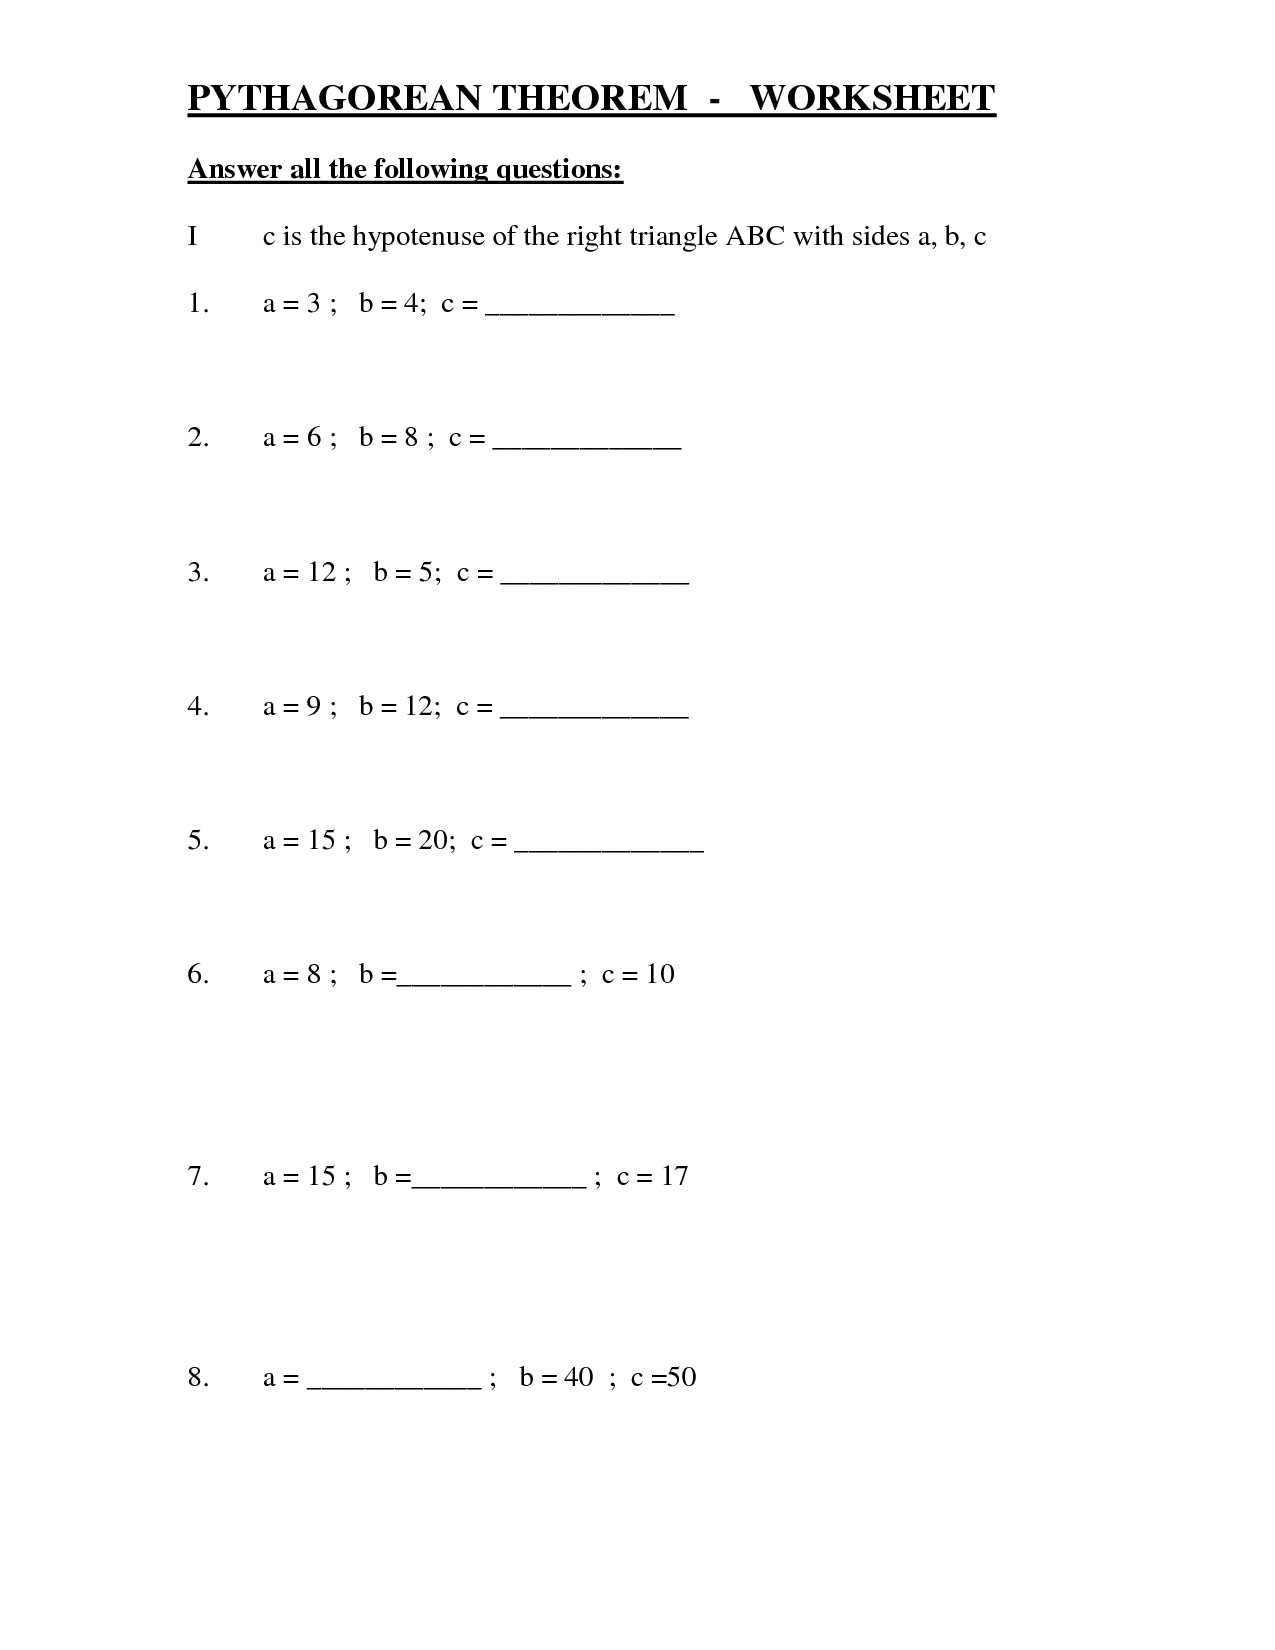 Substance Abuse Group Worksheets together with 40 Pythagorean theorem Word Problems Worksheet Pythagorean theorem